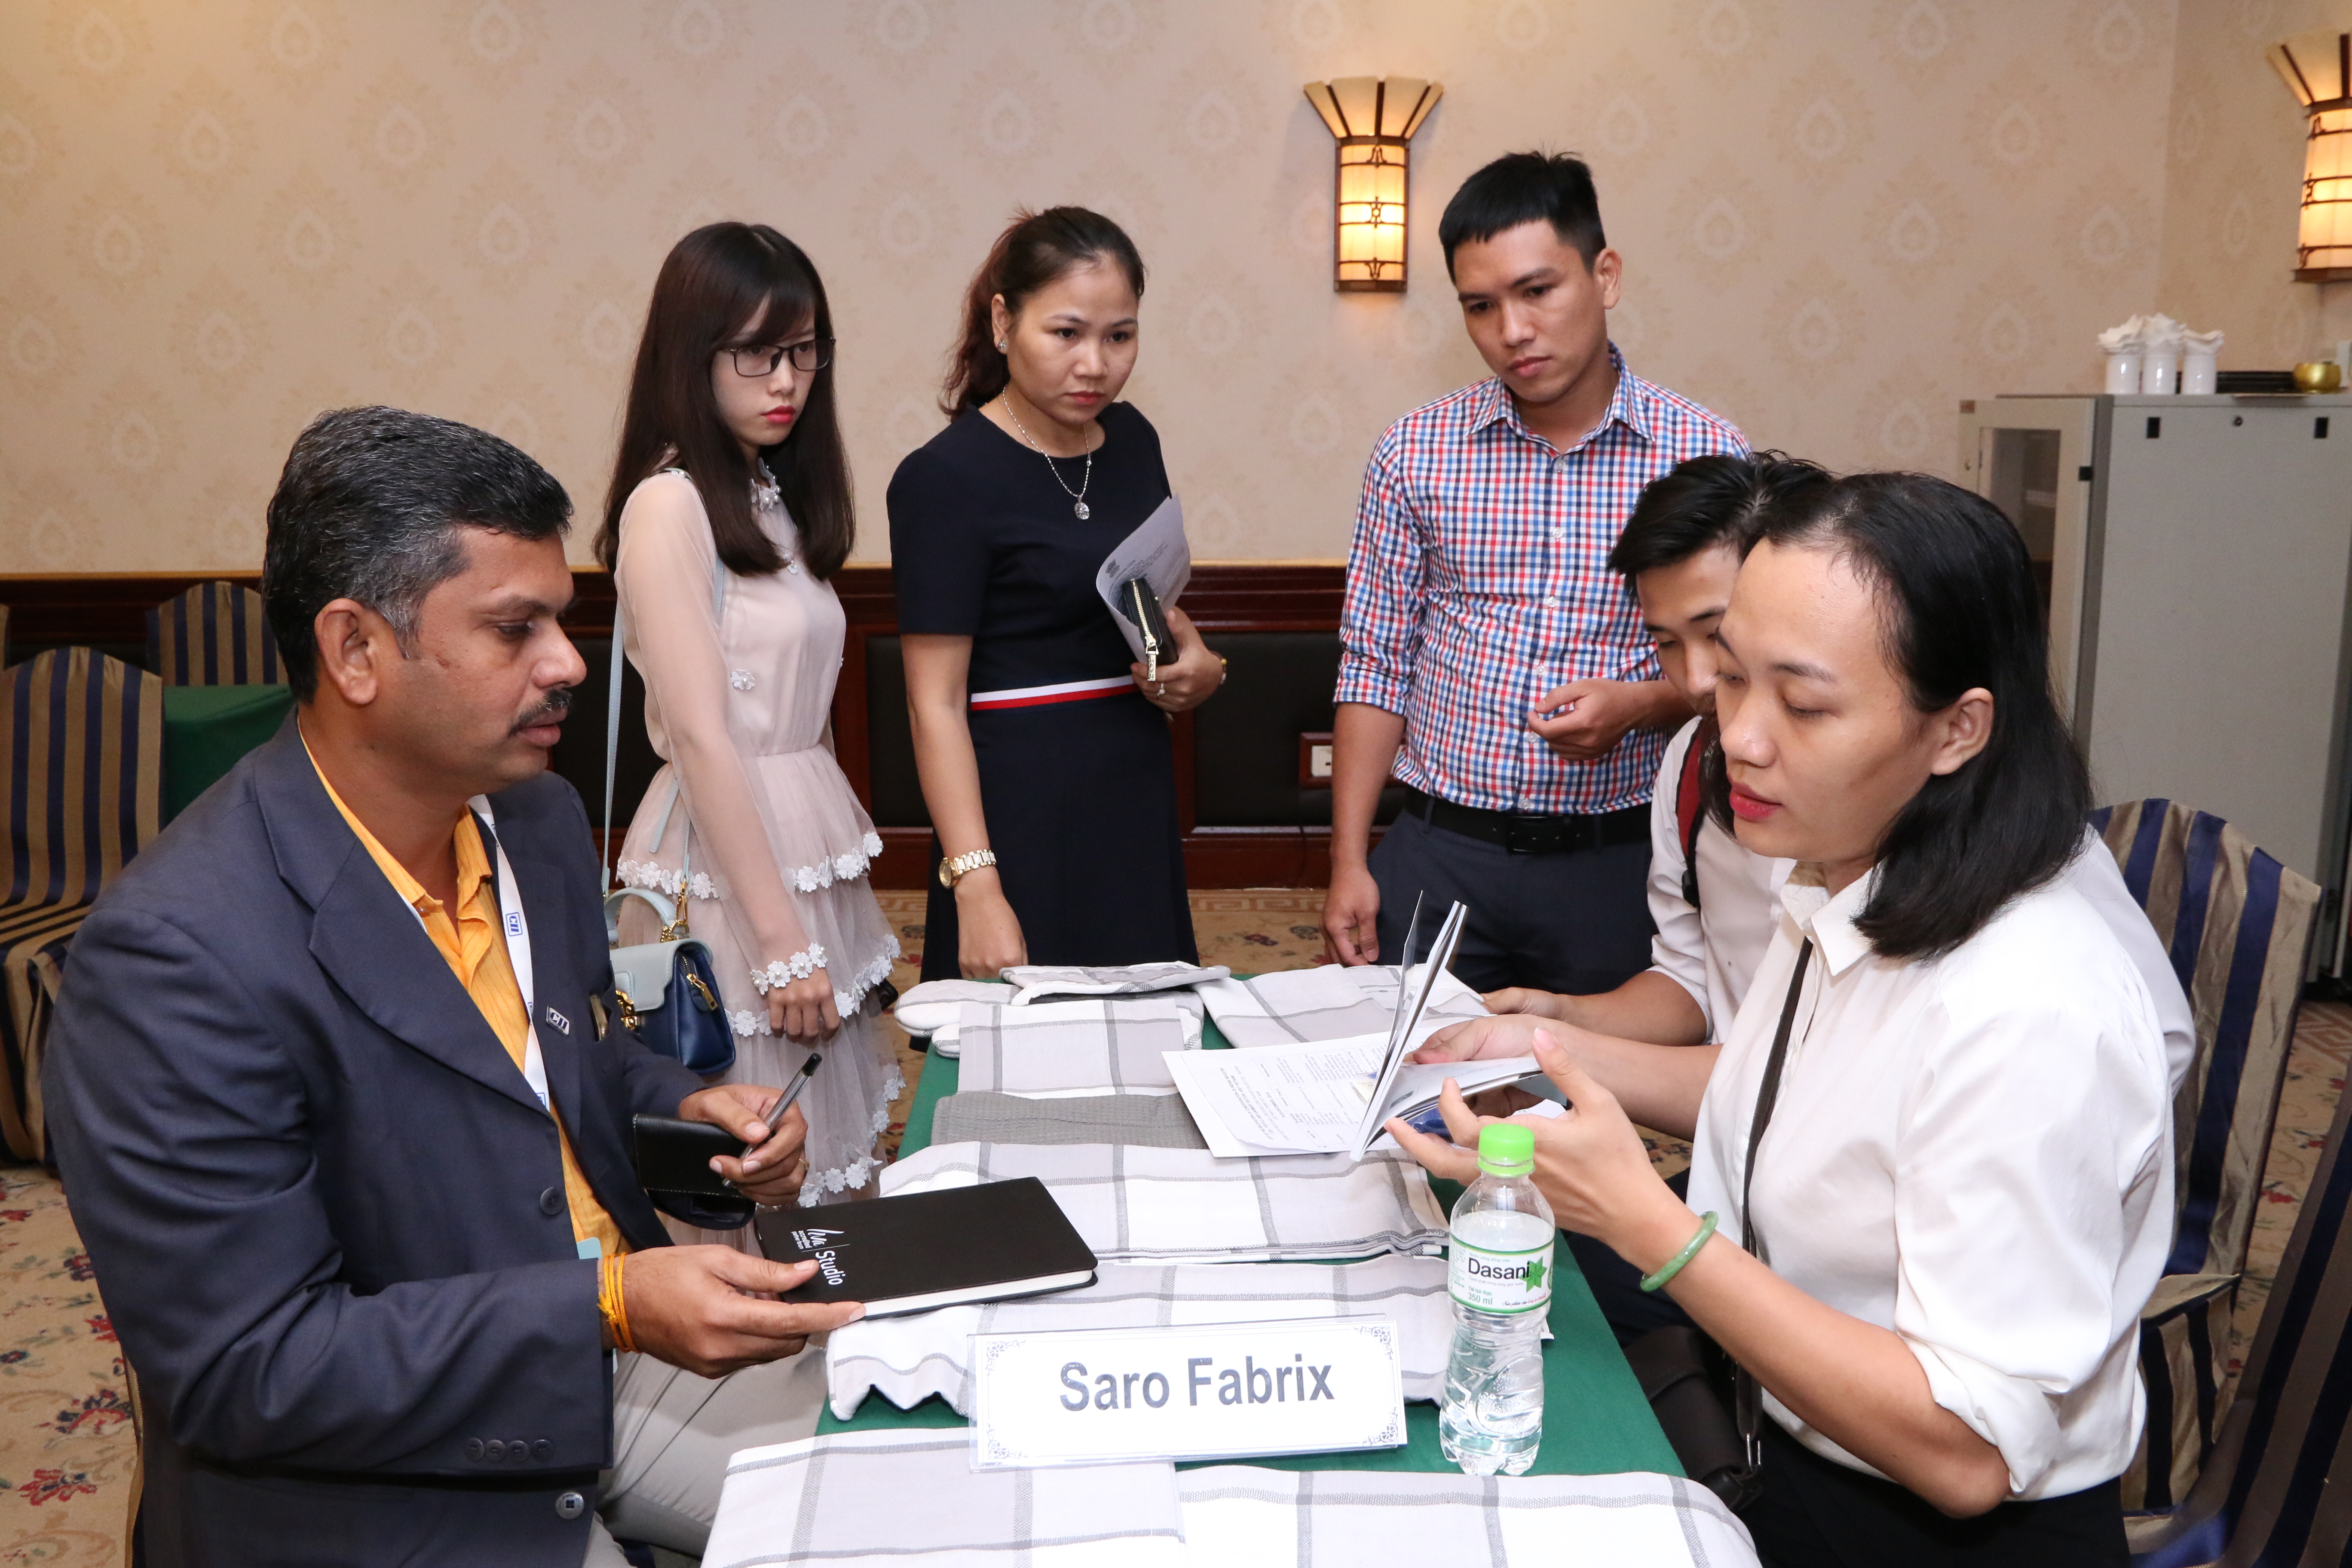 A business matching session at a B2B meeting in textiles and garments in Ho Chi Minh City on December 19, 2018. Photo: Consulate General of India